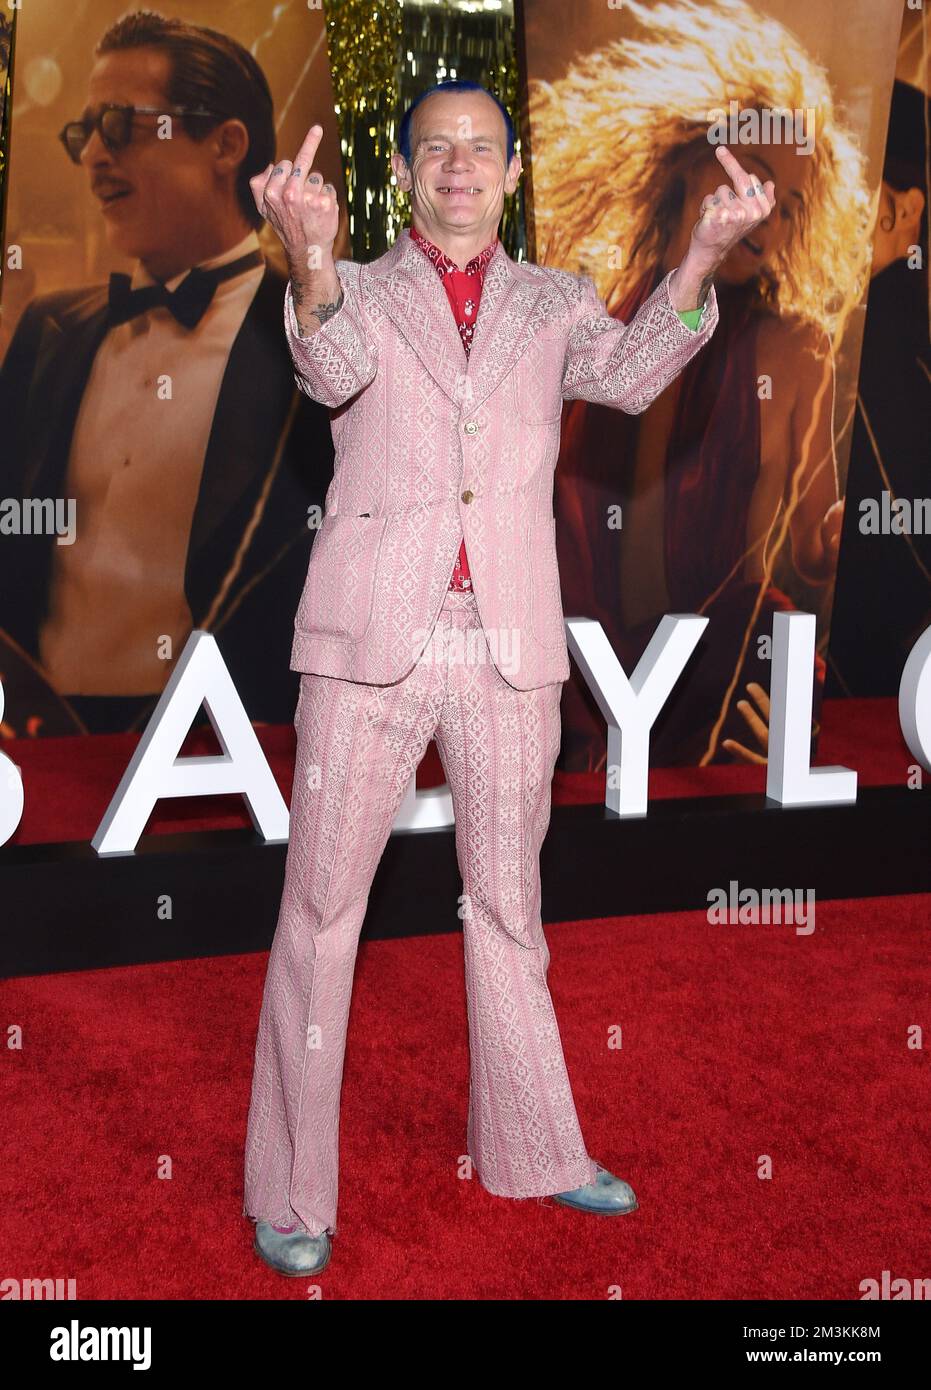 Los Angeles, USA. 15th Dec, 2022. Flea, Michael Peter Balzary arriving to Paramount Pictures global premiere screening of “Babylon” held at the Academy Museum of Motion Pictures in Los Angeles, CA on December 15, 2022. © OConnor / AFF-USA.com Credit: AFF/Alamy Live News Stock Photo